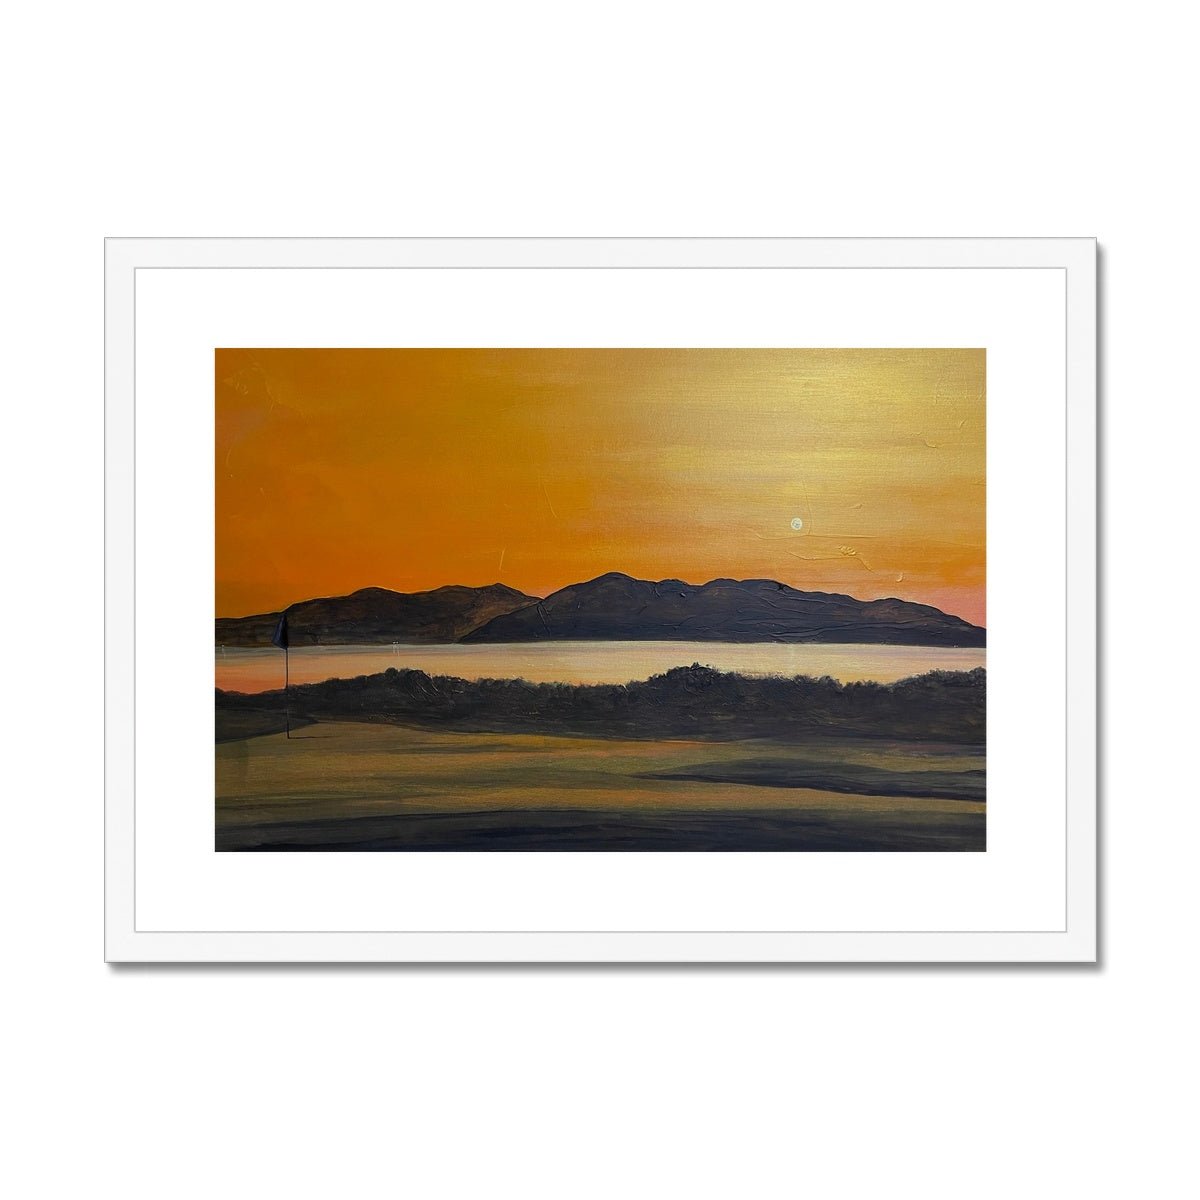 Arran & The 5th Green Royal Troon Golf Course Painting | Framed & Mounted Prints From Scotland-Framed & Mounted Prints-Arran Art Gallery-A2 Landscape-White Frame-Paintings, Prints, Homeware, Art Gifts From Scotland By Scottish Artist Kevin Hunter